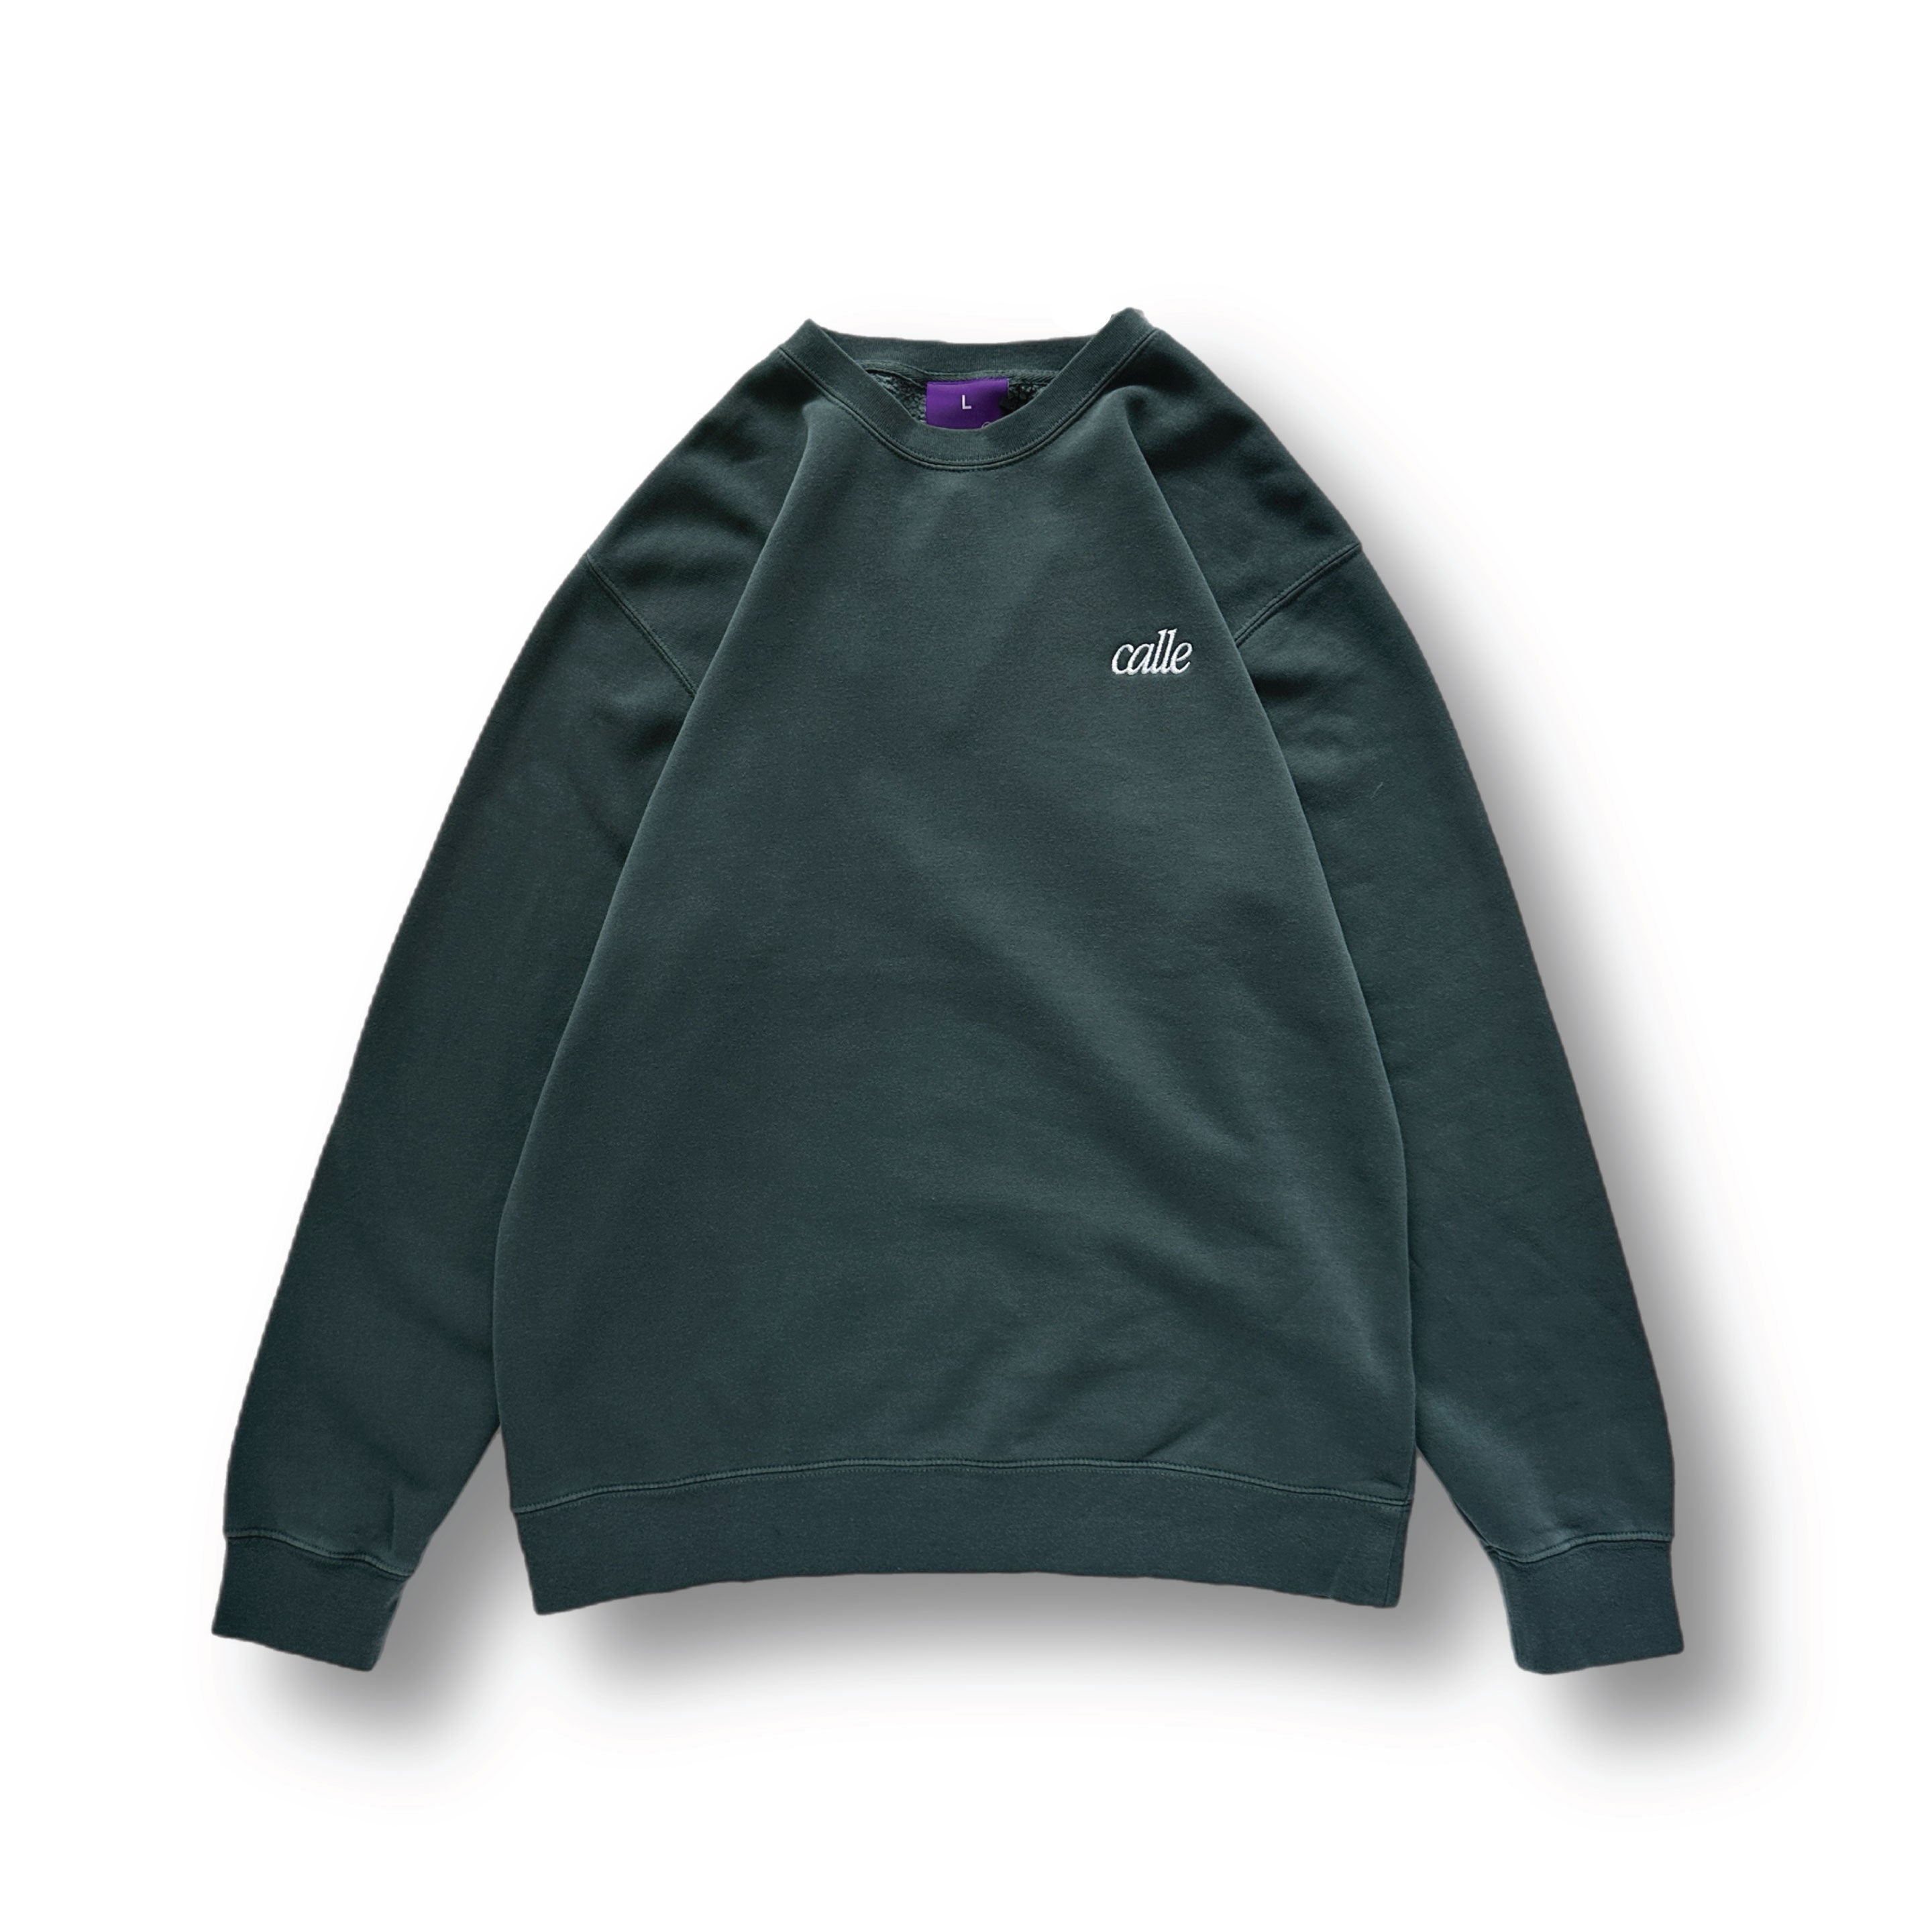 Faded Embroidered Calle Crew - Green